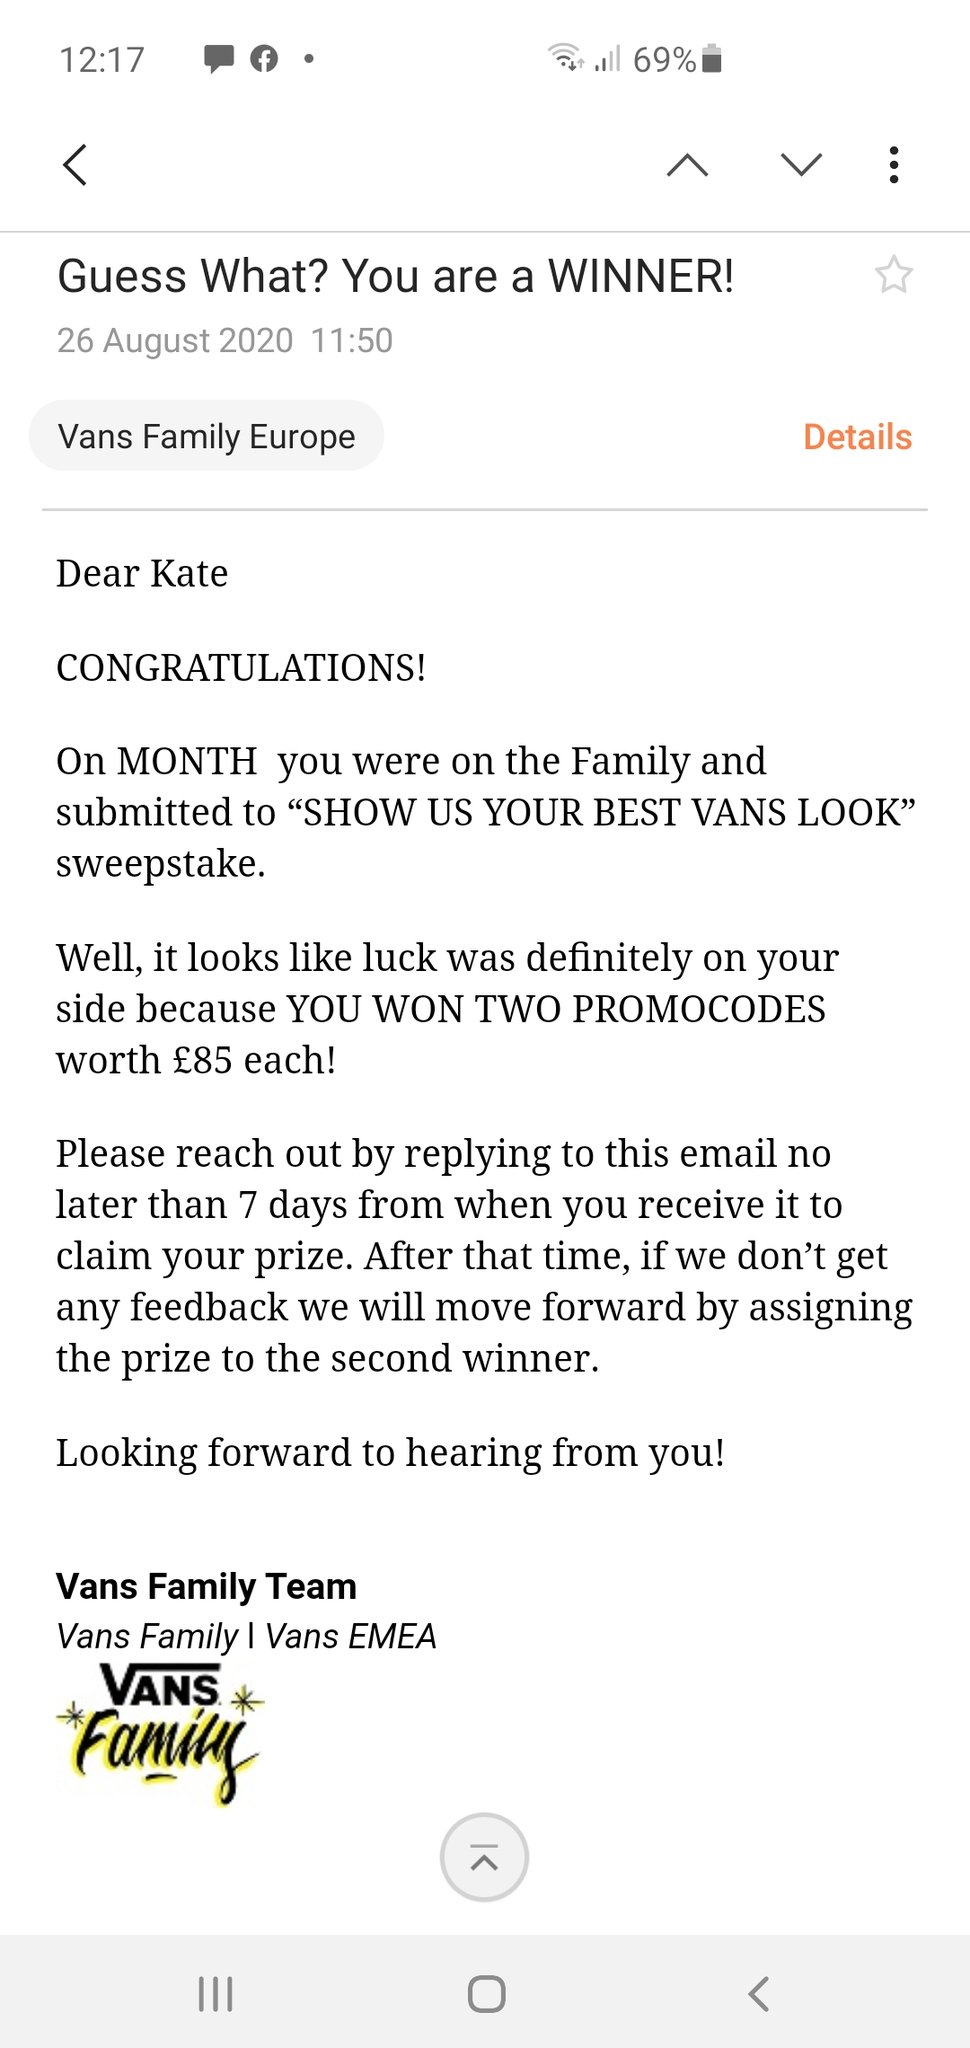 VANS Europe Twitter: "@MchughKate Hey Kate! Yes this looks real to me! Congratulations on winning! If you'd like to send me exact email address it sent from I can